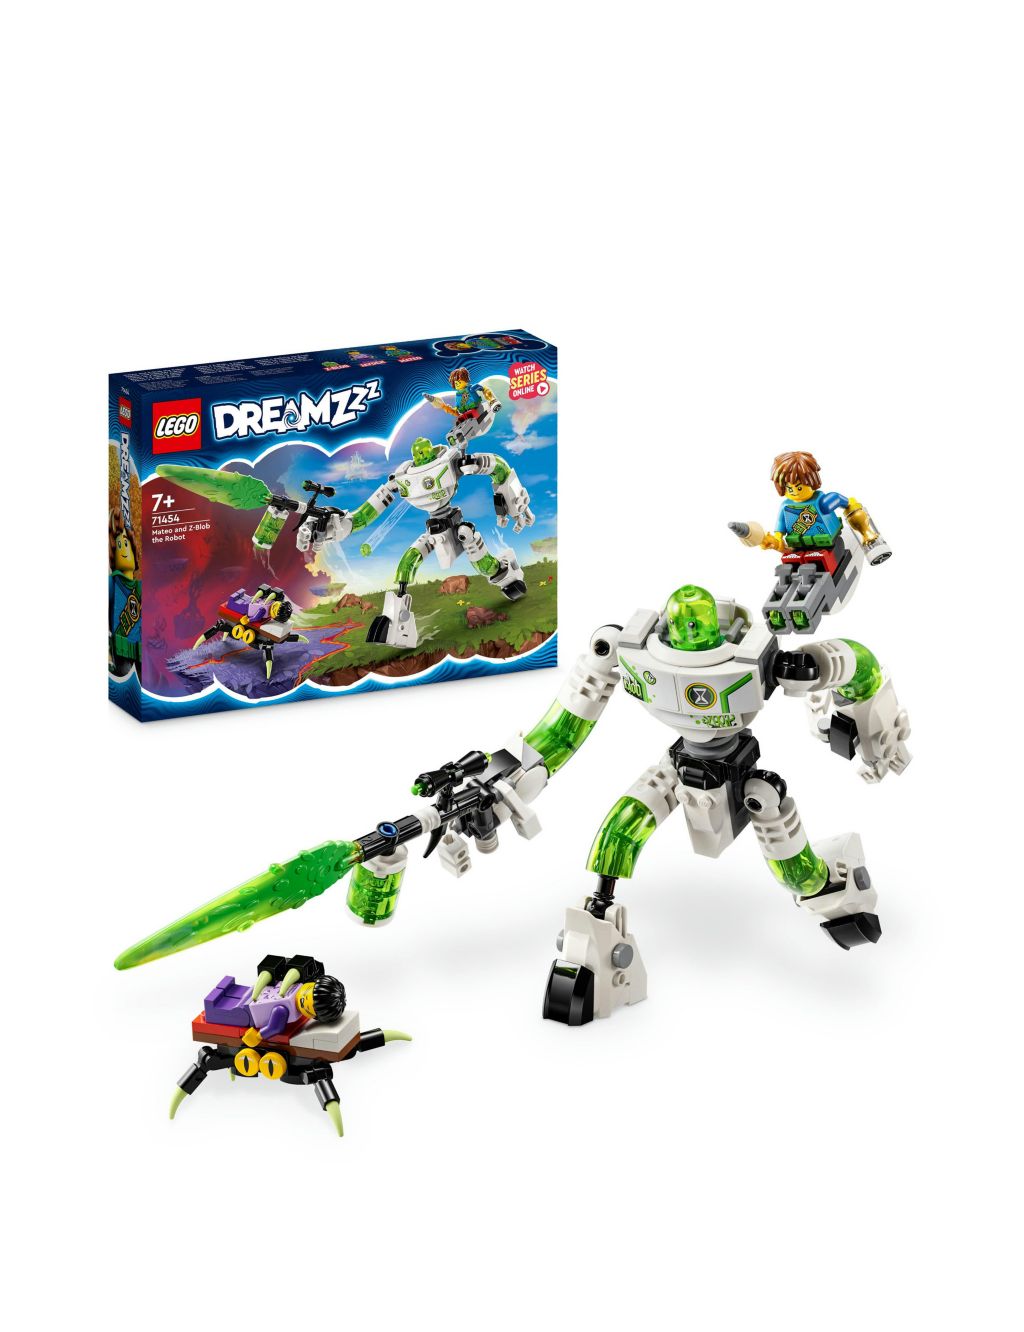 LEGO DREAMZzz Mateo and Z-Blob the Robot Toys 71454 (7+ Yrs)